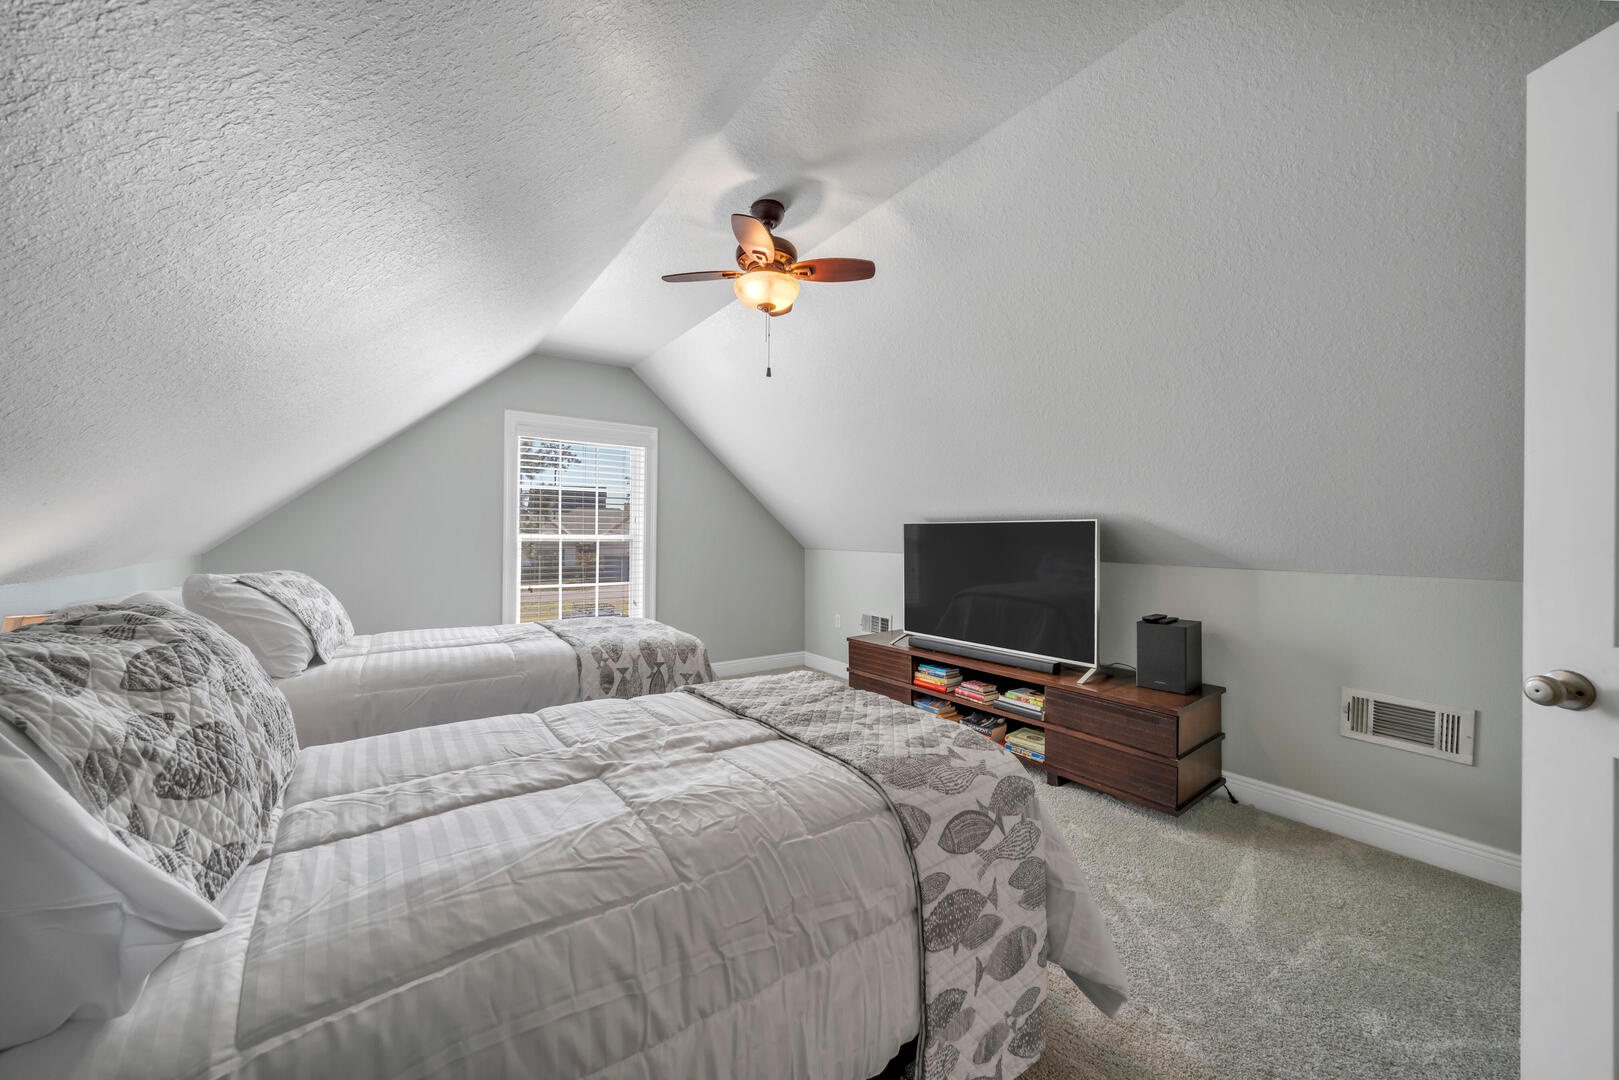 The loft bedroom features two twin beds and a flat screen TV!